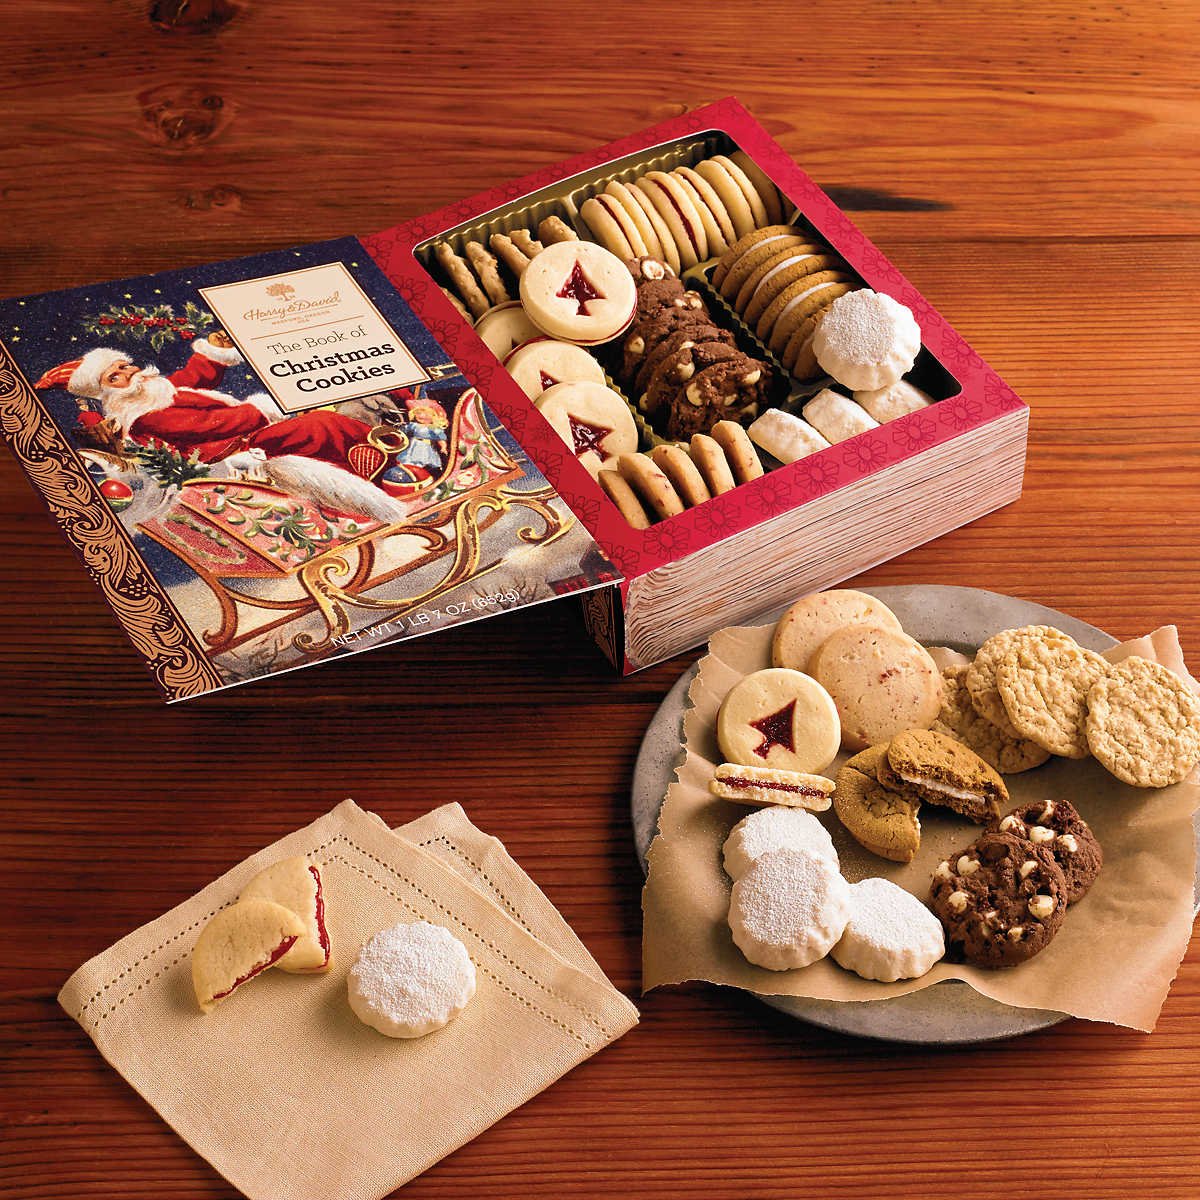 The Book Of Christmas Cookies